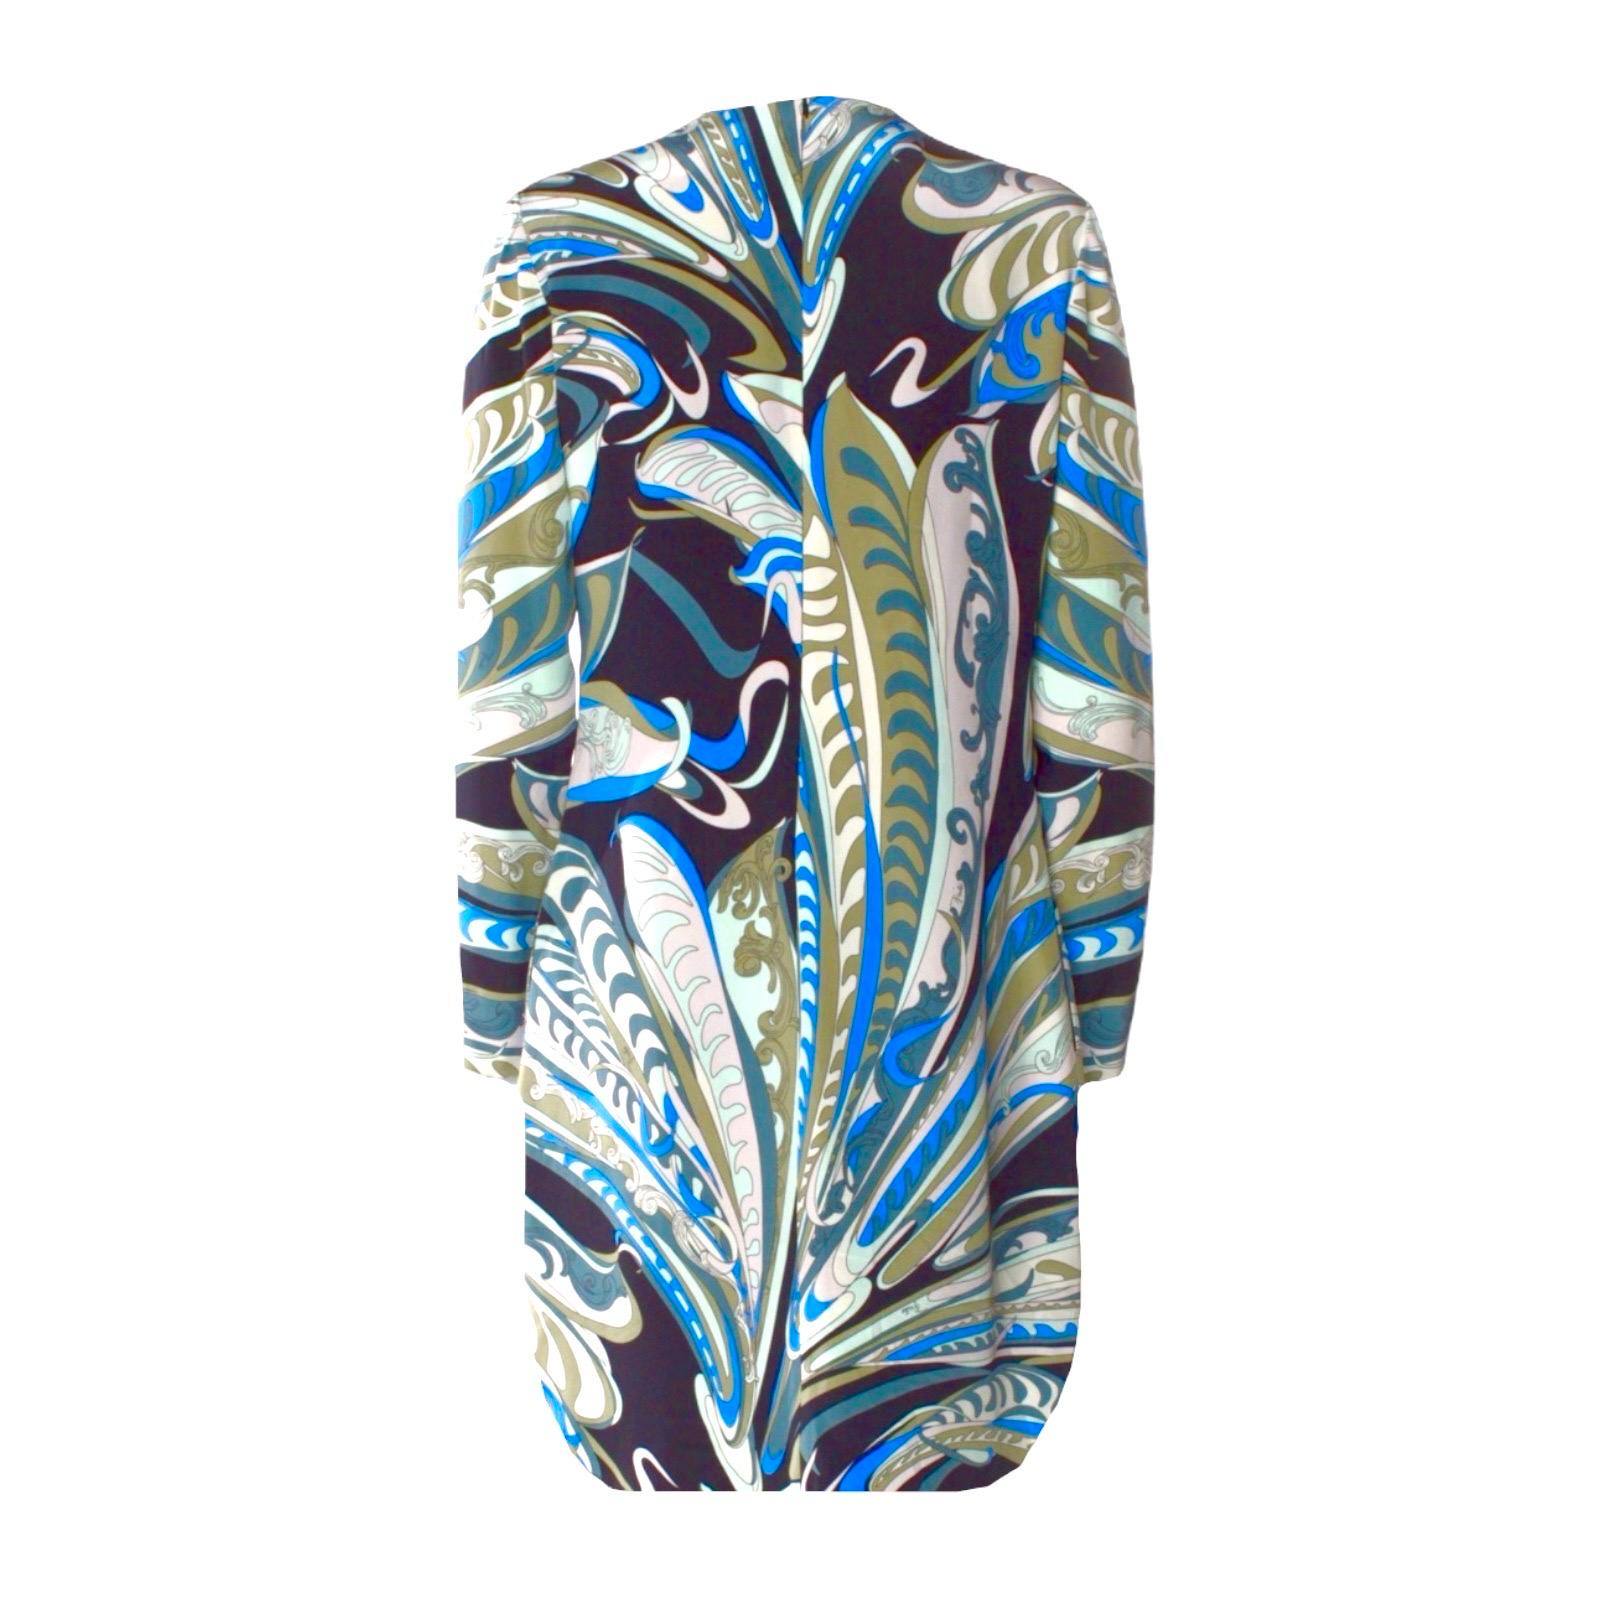 Emilio Pucci's embroidered kaftan is perfect for chic summer parties. Crafted in Italy from luxurious silk-cady, this design has amazing embellishments. Team yours with a clutch and sandals for a perfect classy evening outfit!


A stunning piece by